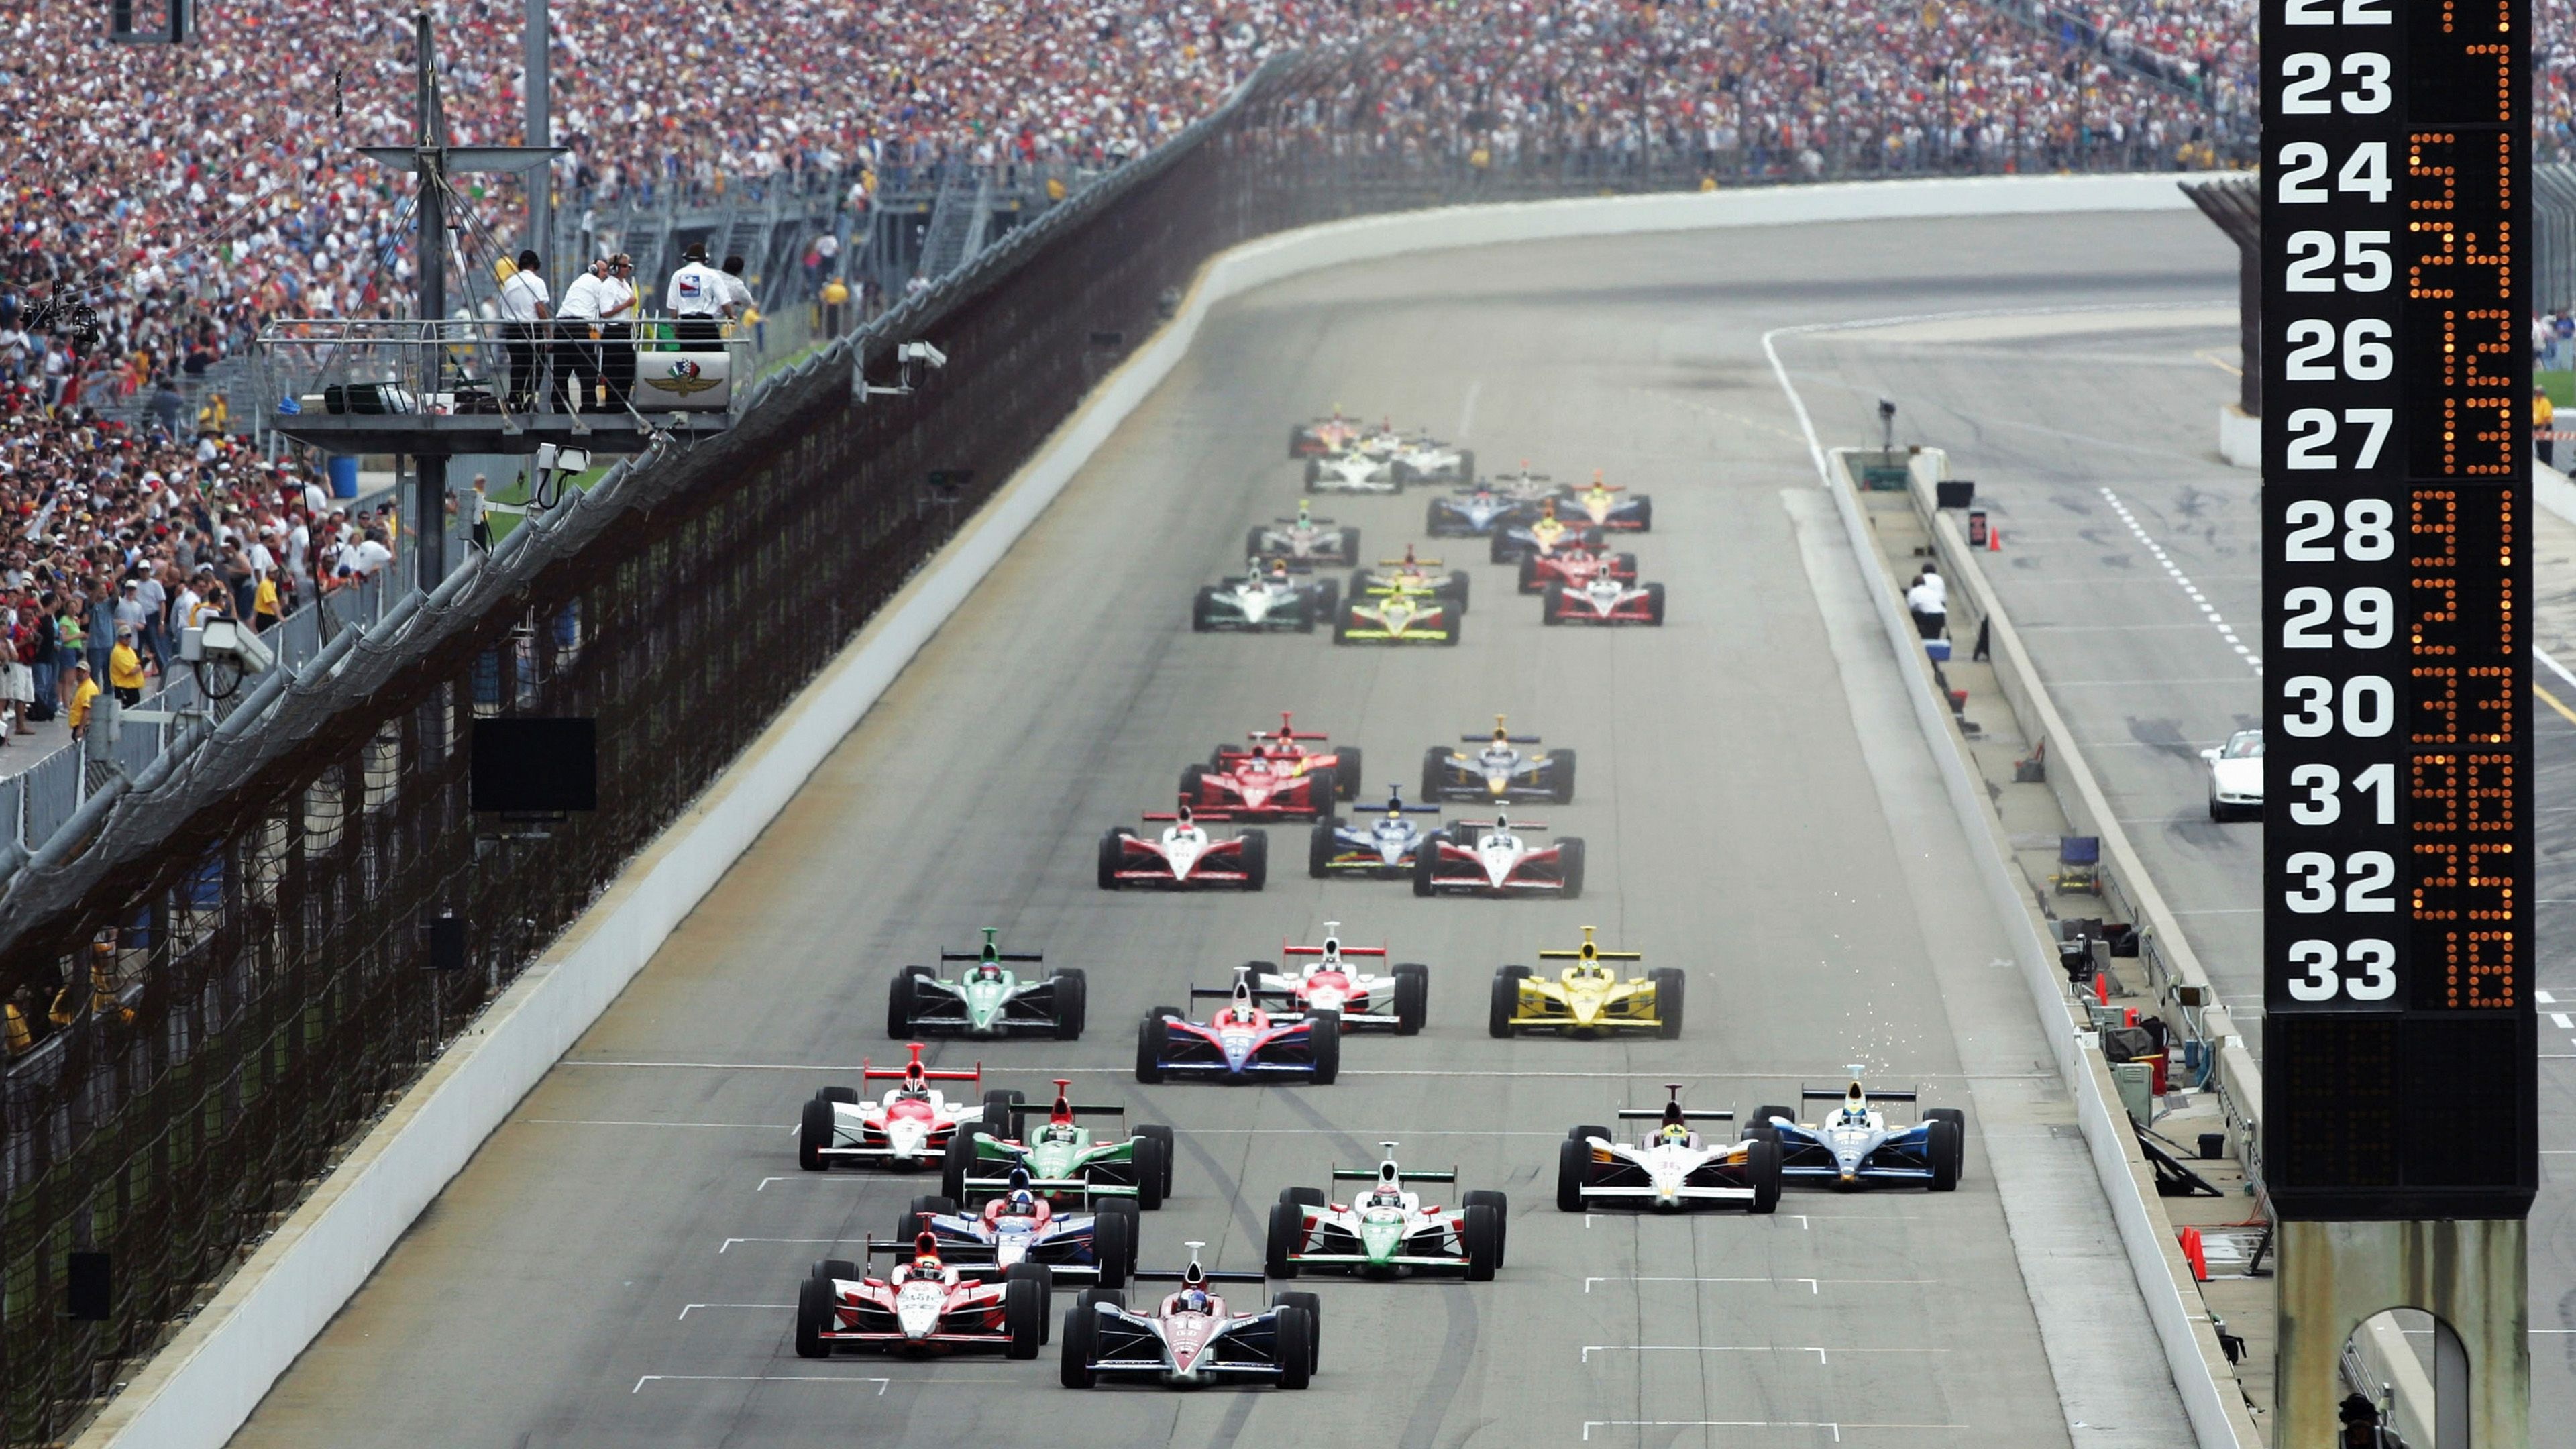 Motorsports: The departure at the Indy 500 in 2004, The open-wheel cars international championship. 3840x2160 4K Background.